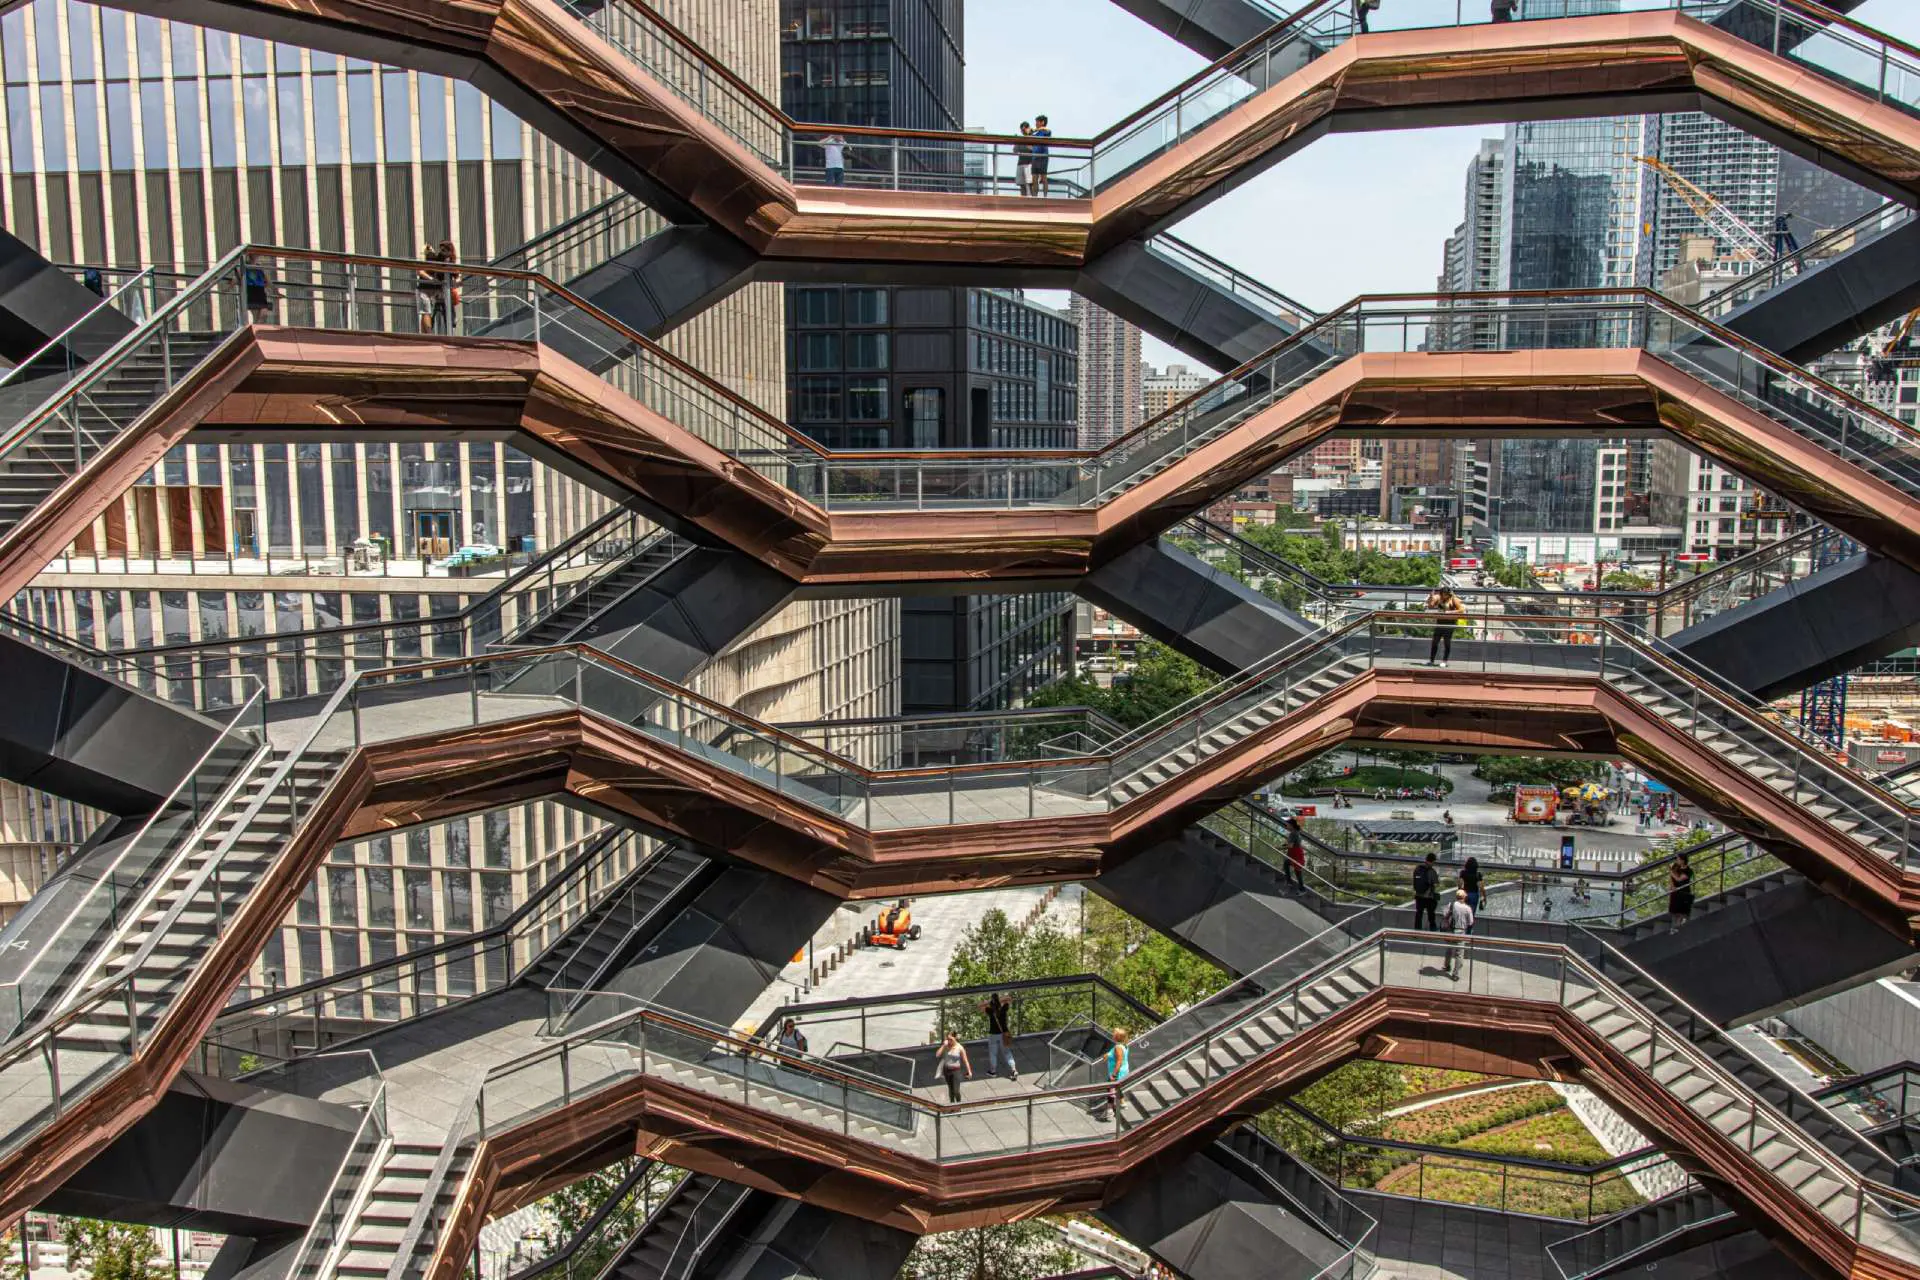 An architectural view of the vessel's intricate honeycomb-like structure with multiple intersecting staircases, against a Manhattan urban backdrop.